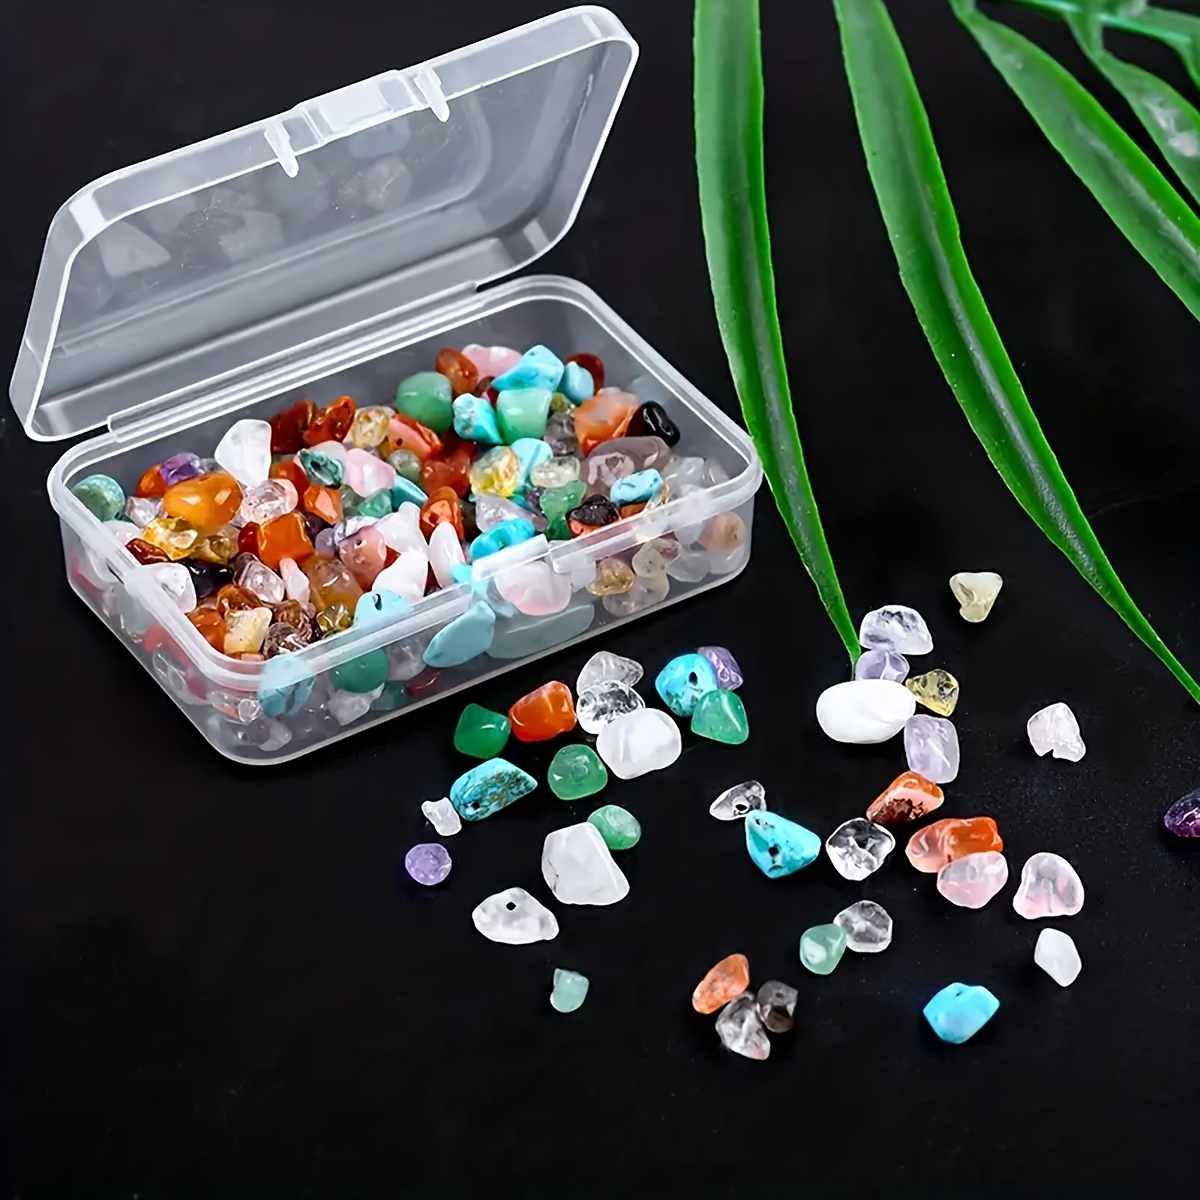 

100/200 Pcs Natural Stone Chip Beads 5-8mm - Assorted Crystal Gemstone For Diy Jewelry Making, Perfect For Necklaces, Bracelets & Earrings - Stylish Crafting Supplies